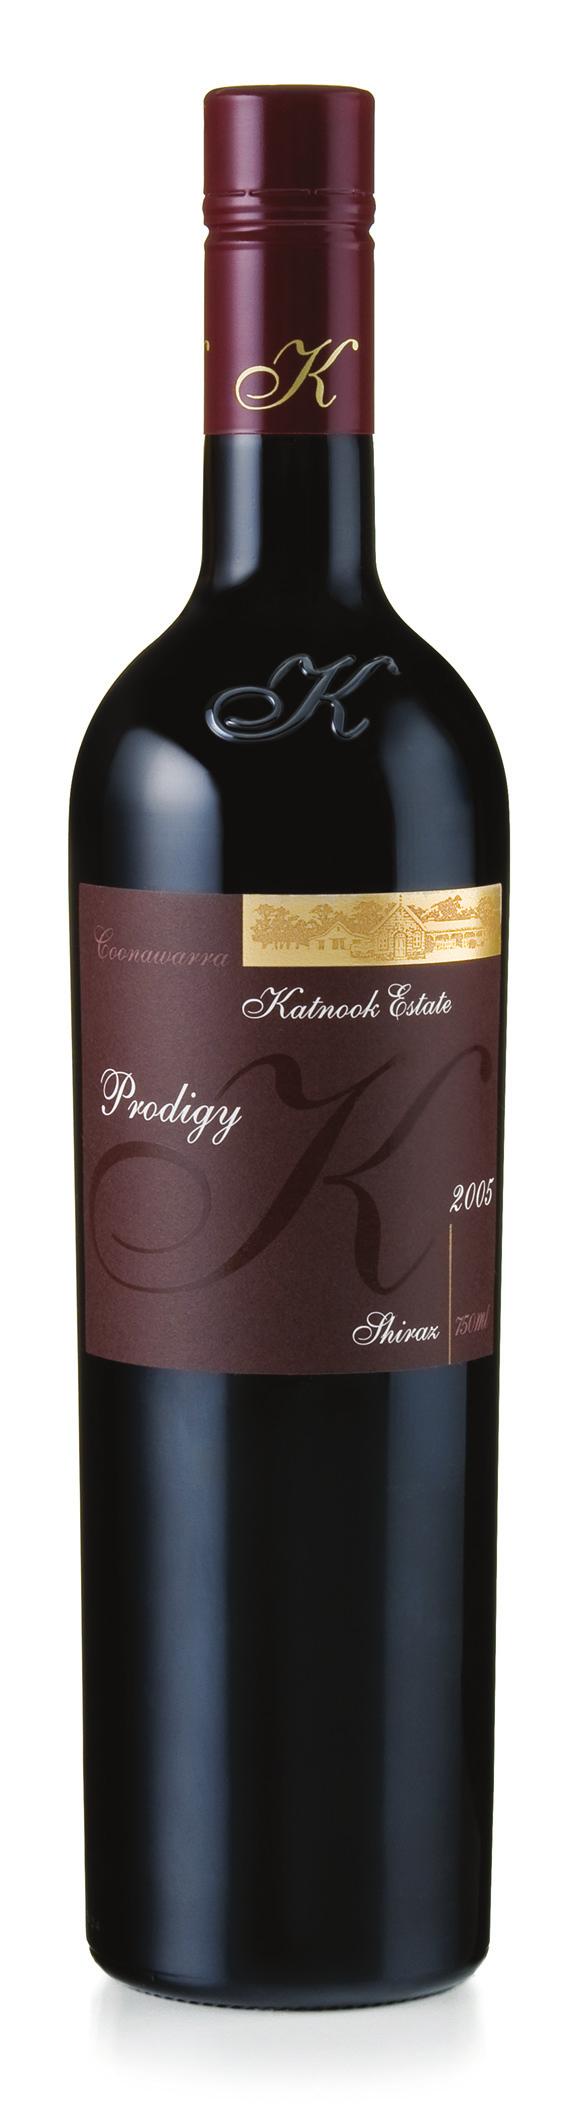 Katnook Prodigy Coonawarra Shiraz 2005 Harvest. :: 18th March to 29th March. ph :: 3.3 Acidity :: 6.6 gms/l Alc/vol. :: 14.